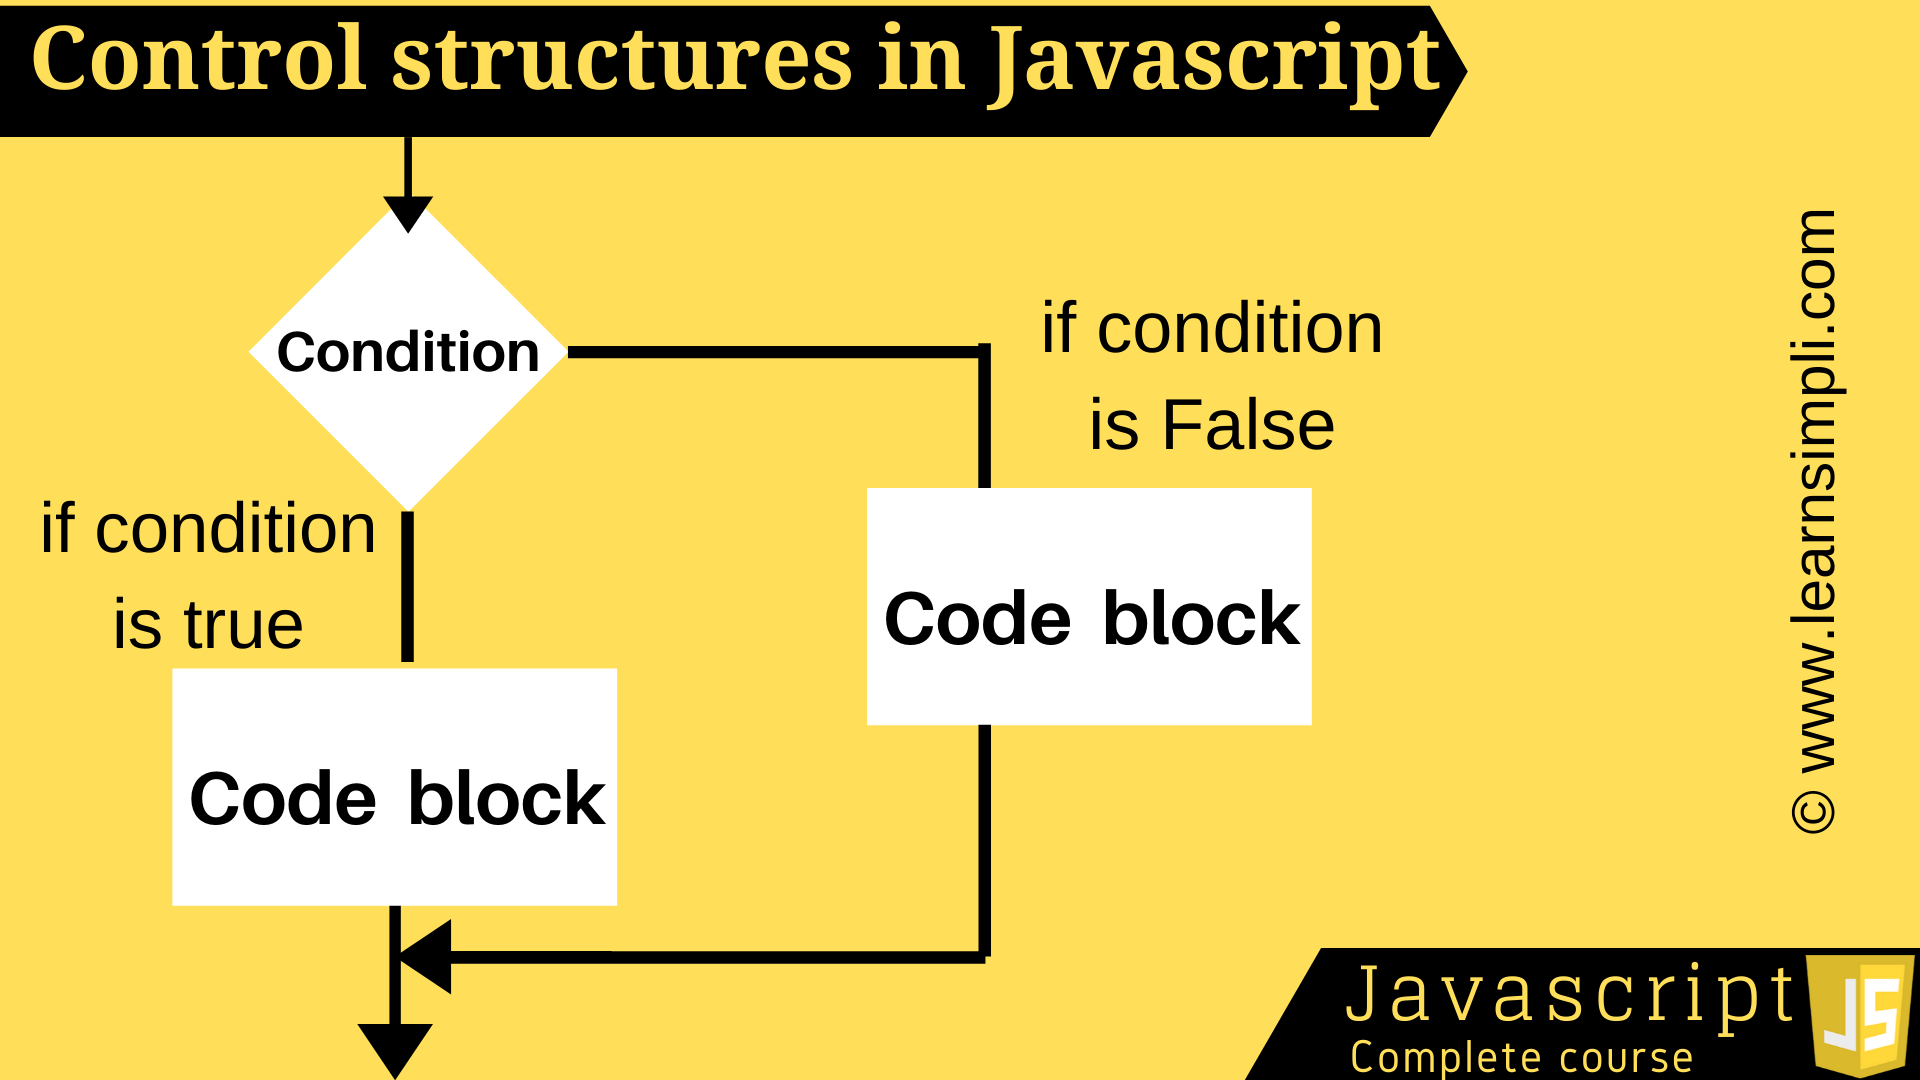 Control structures in Javascript